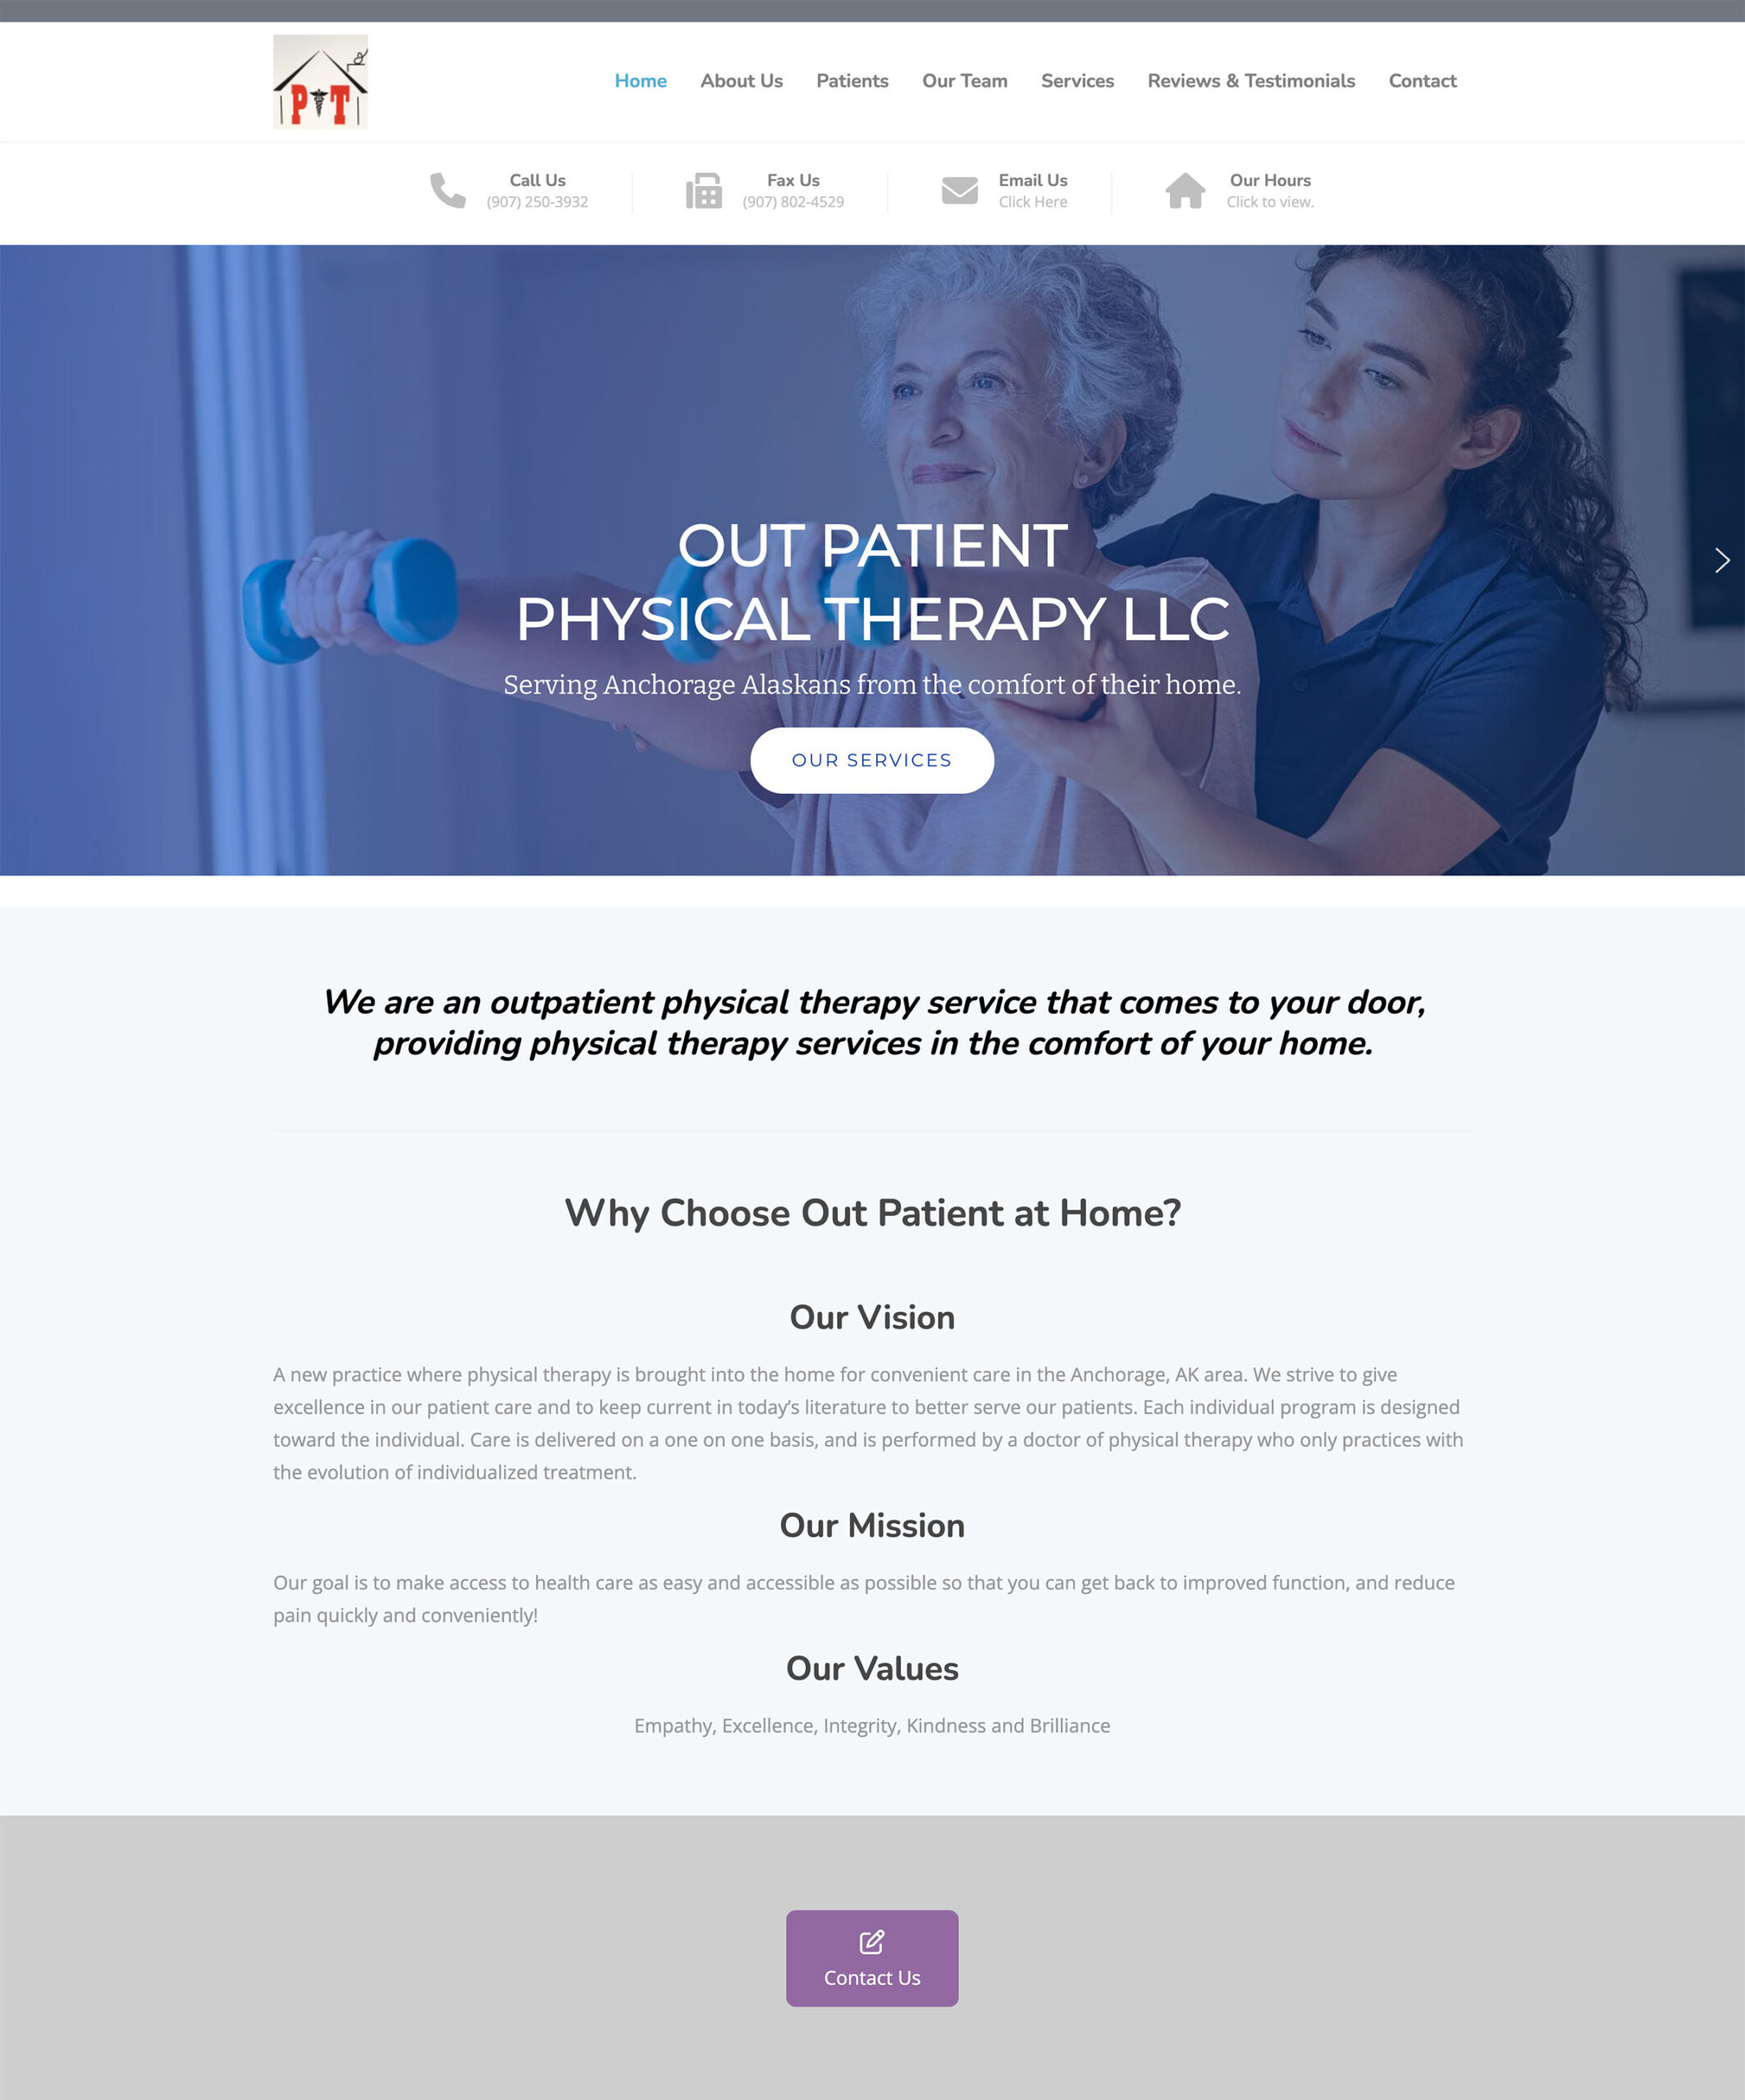 outpatient physical therapy Homepage Screenshot